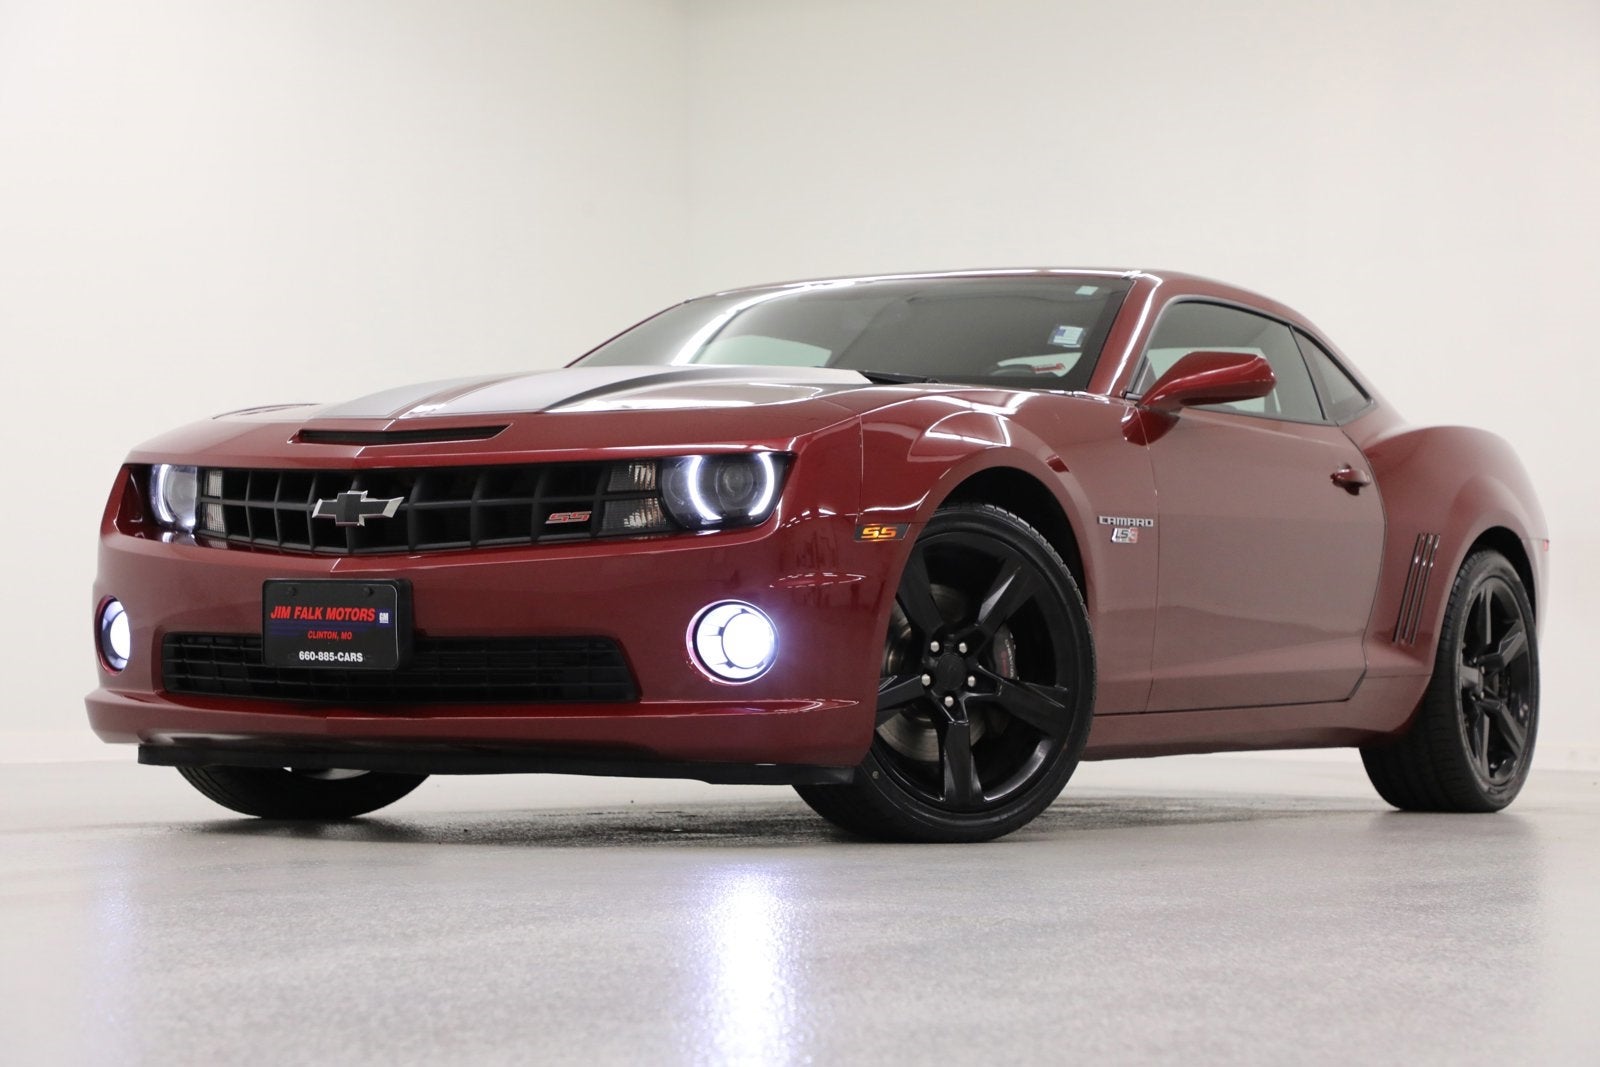 2011 Chevrolet Camaro 2SS 6.2L V8 Heated Black Leather Seats Head Up 20 Inch Black Wheels Dual Exhaust Bluetooth Cruise